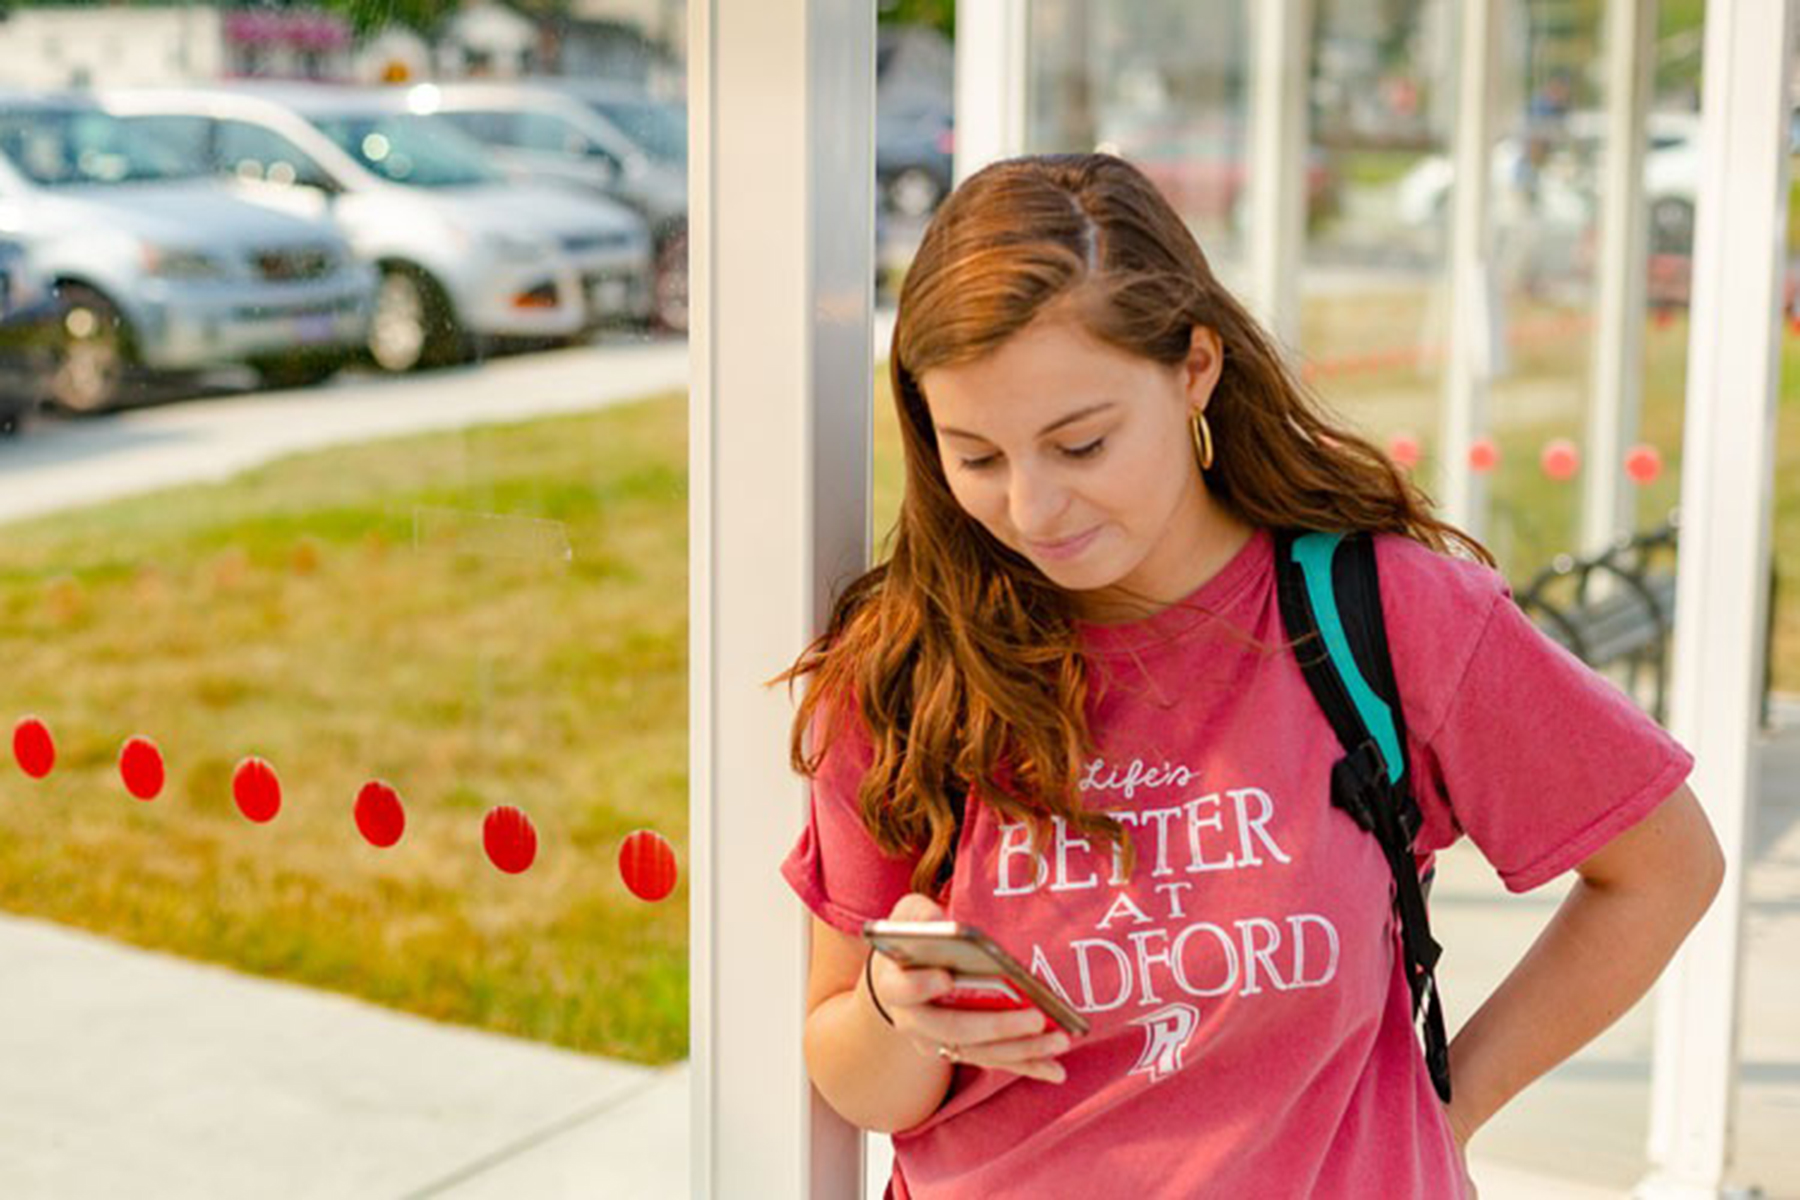 Student looking at her cell phone on campus.